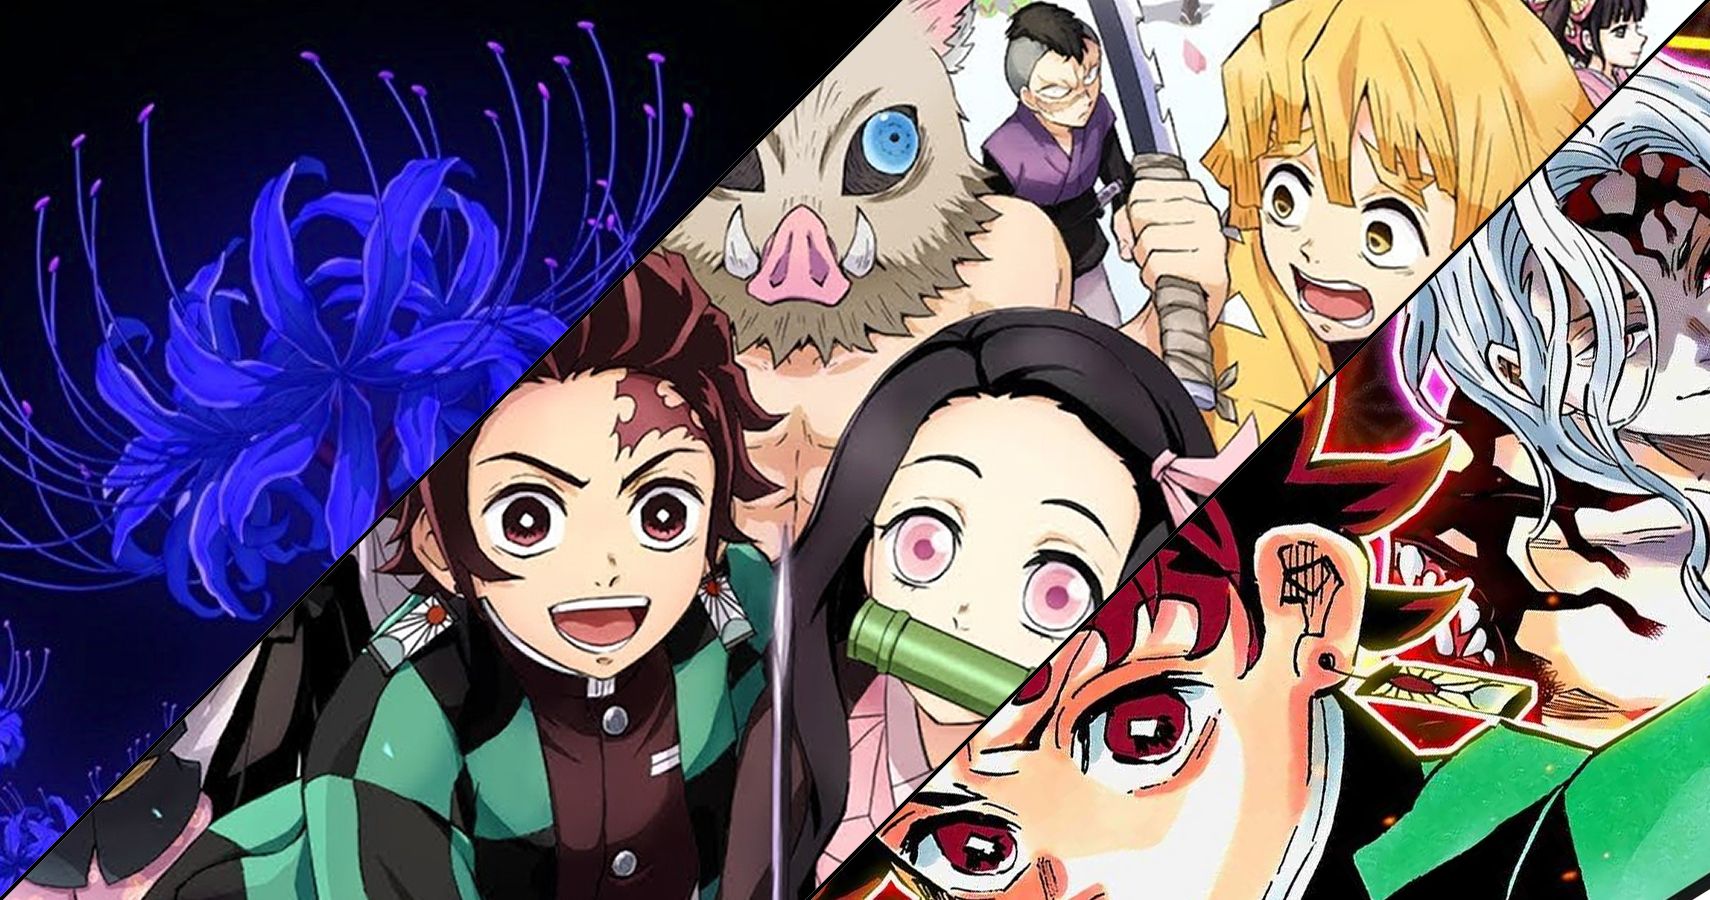 Demon Slayer: 10 Burning Questions We Still Have Now That The Manga Is Over